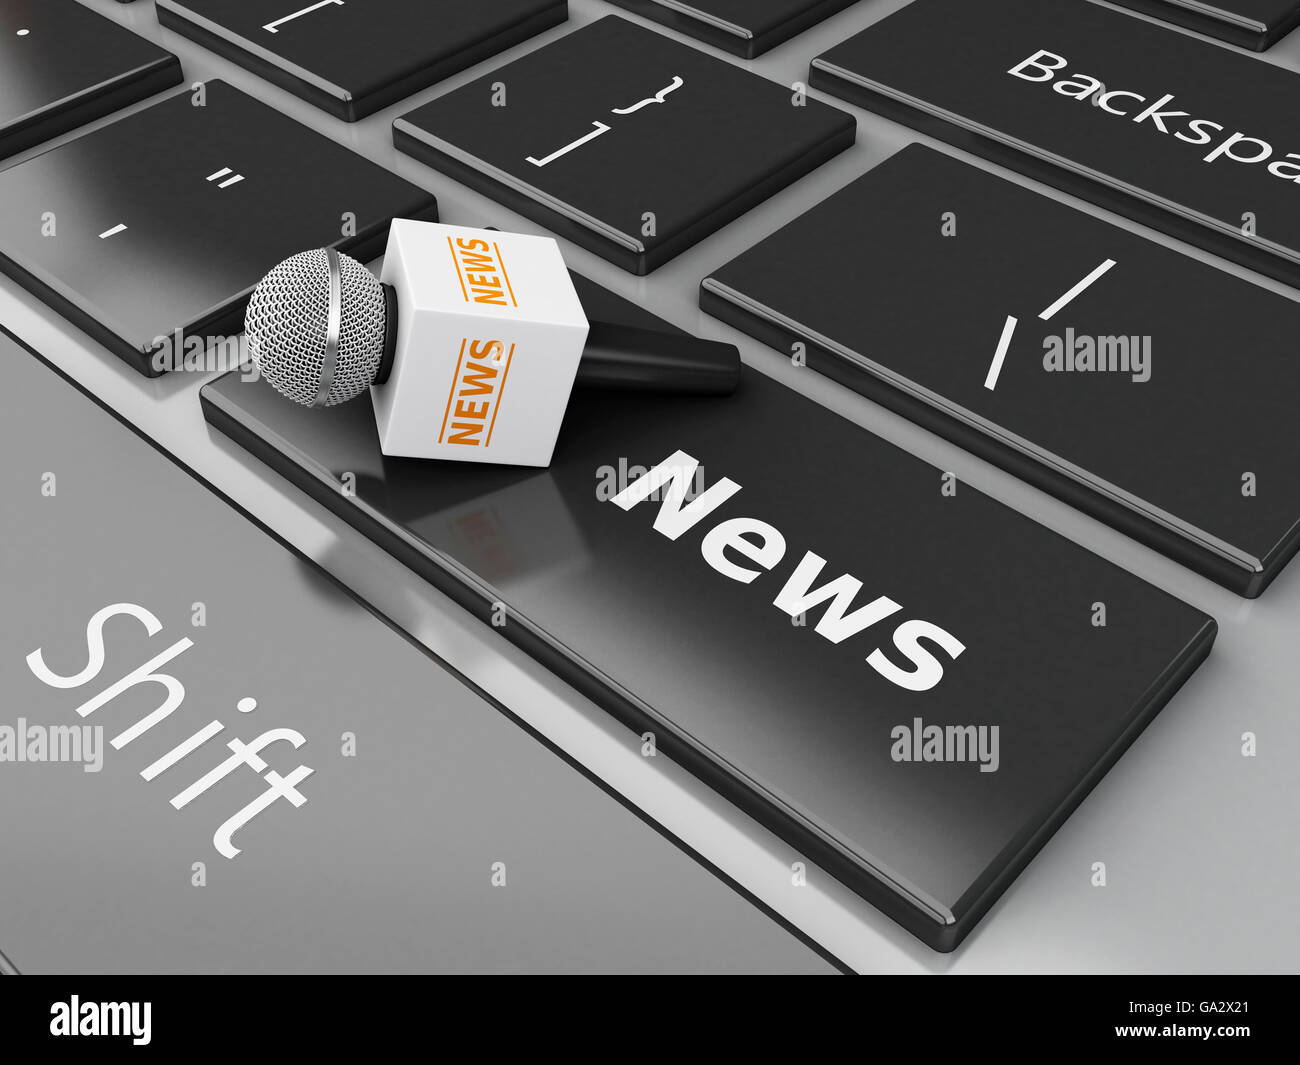 3d renderer image. News microphone and computer keyboard with word News. Stock Photo